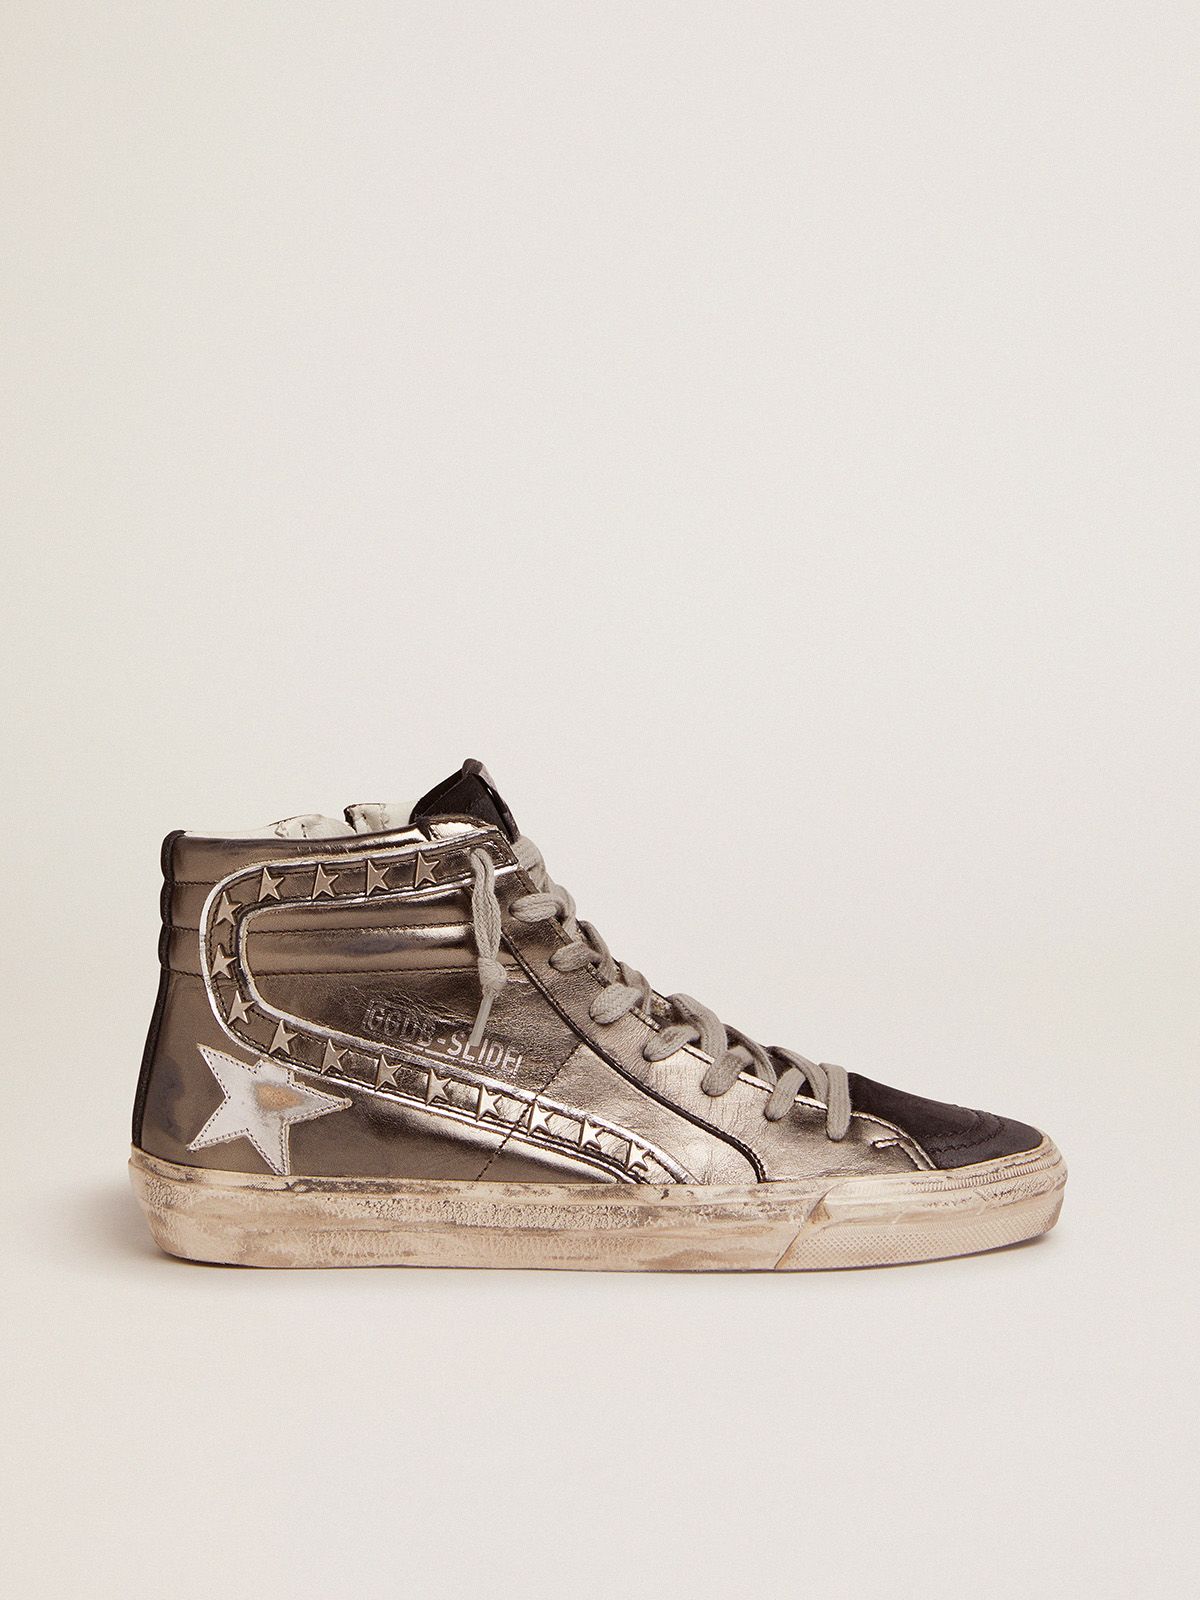 golden goose studs leather with and star-shaped silver upper Slide sneakers laminated